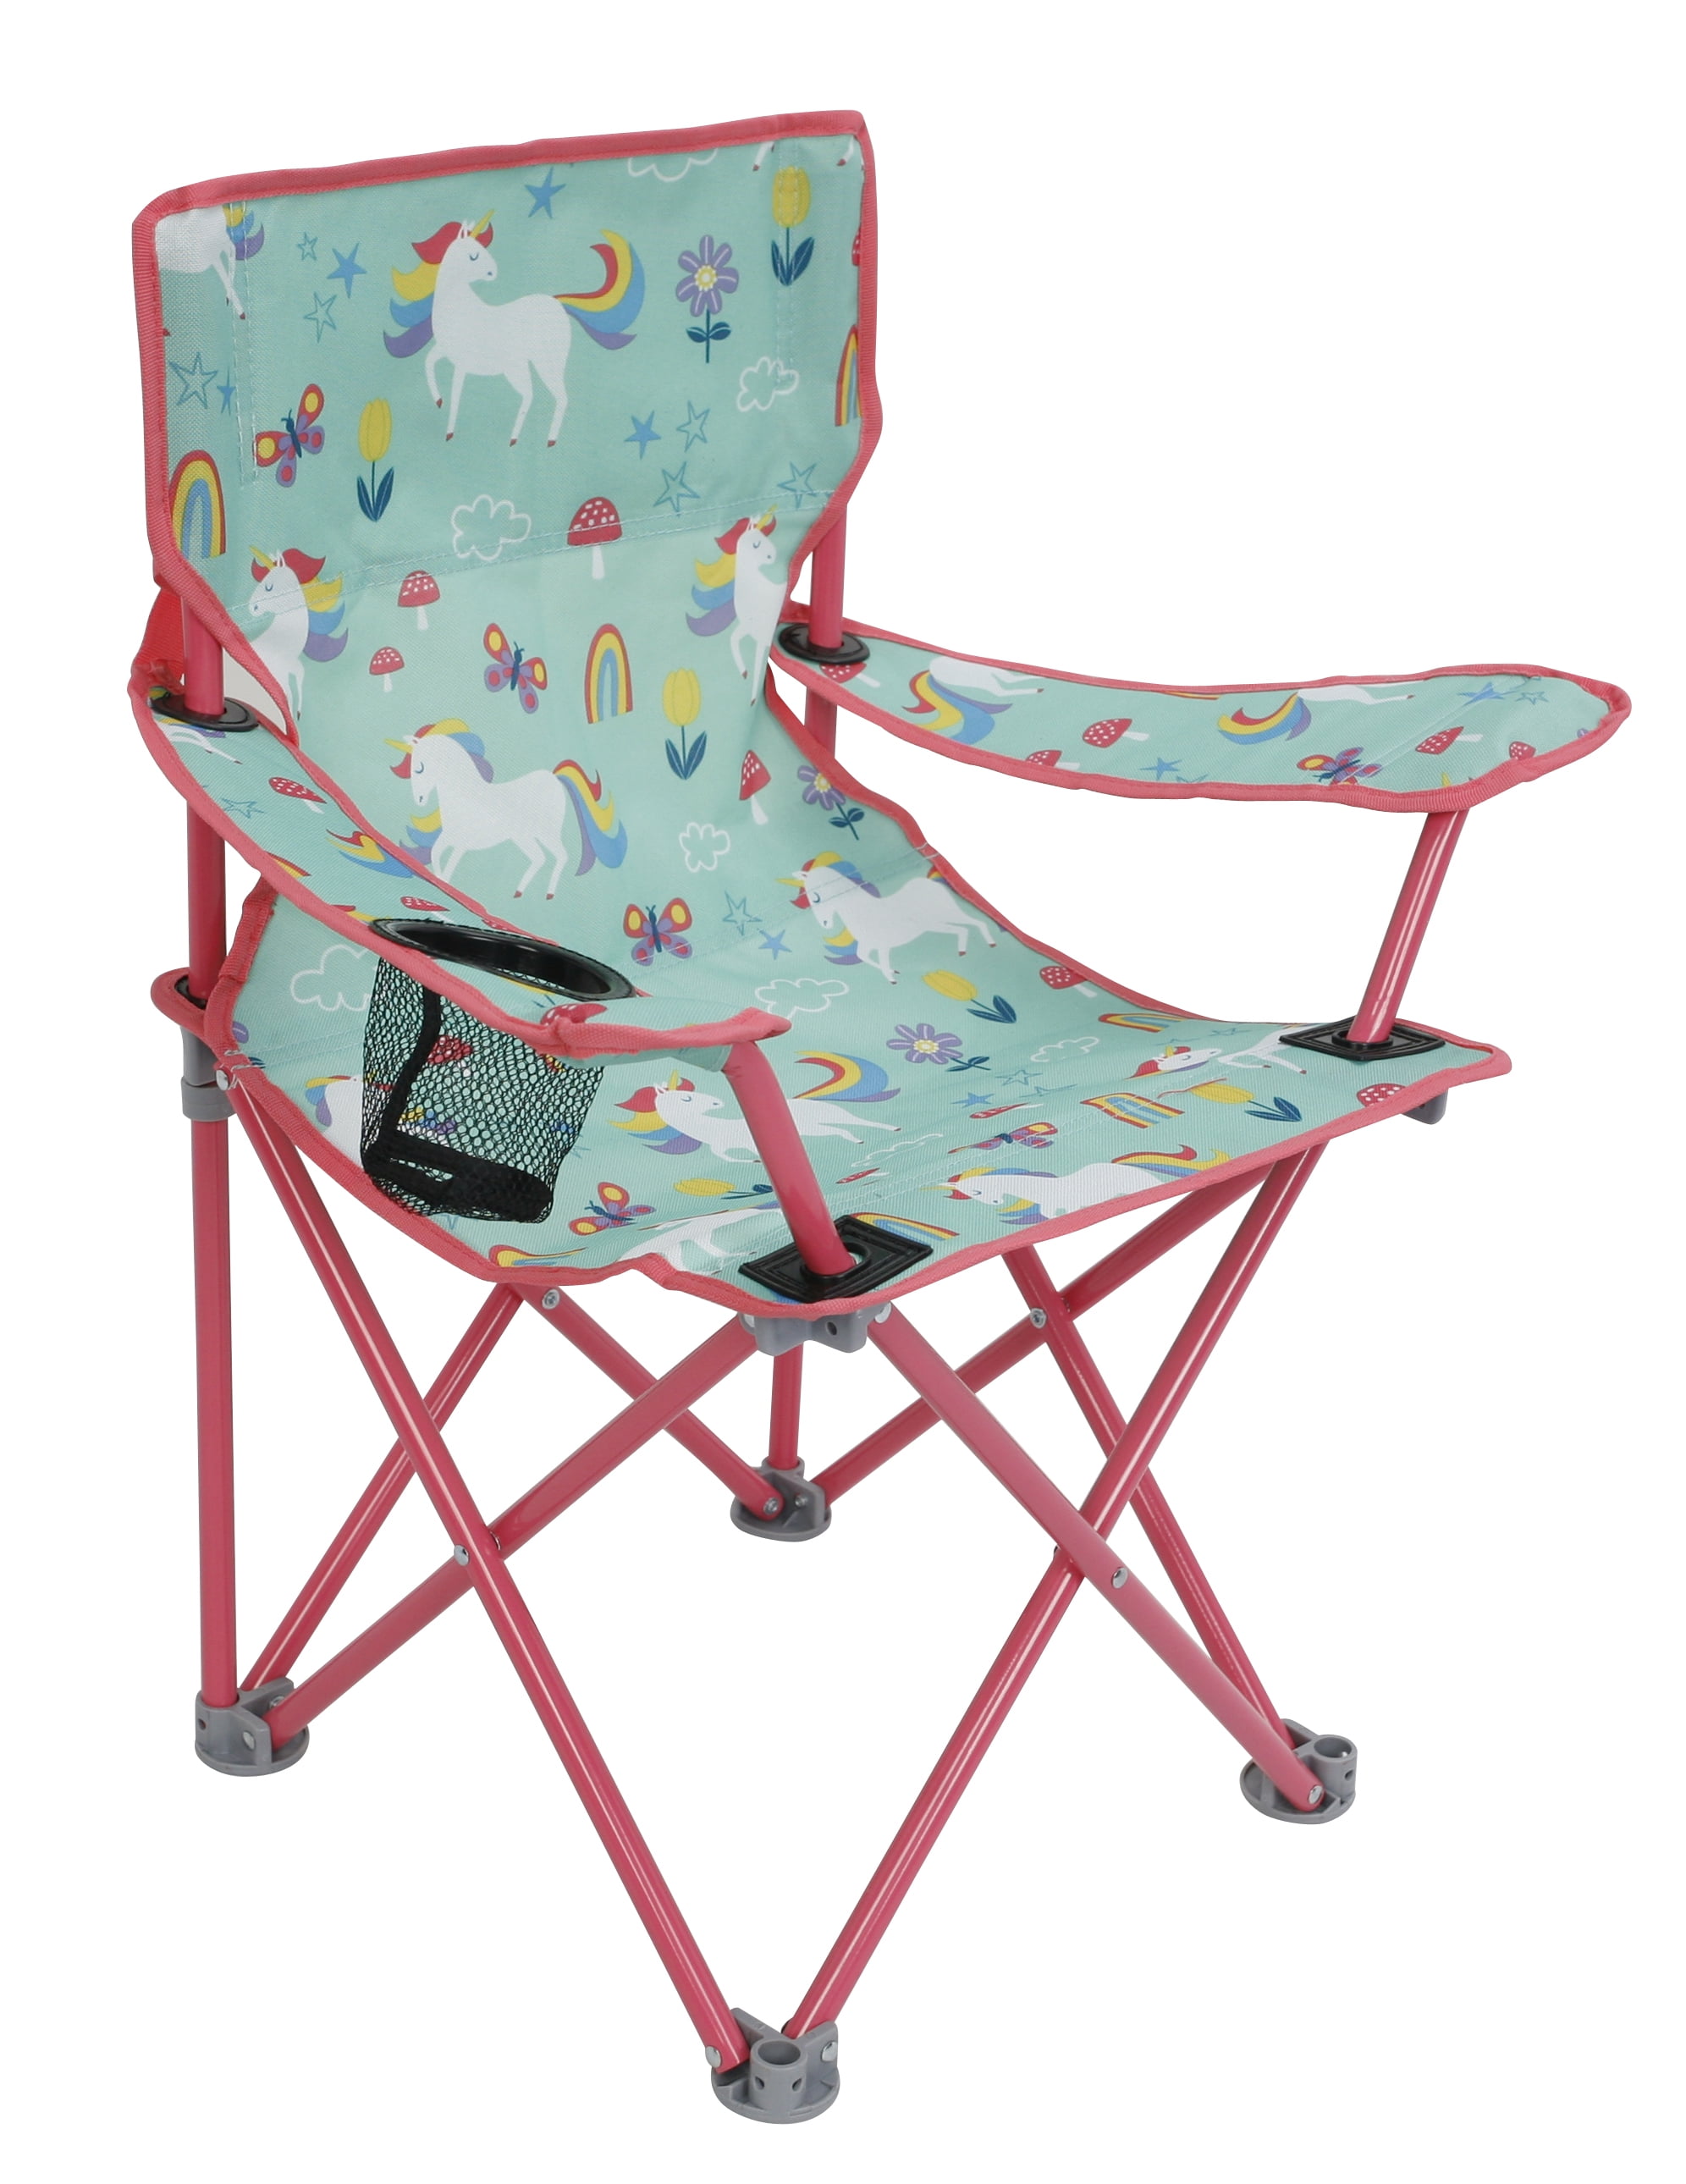 Crckt Kids Folding Camp Chair with Safety Lock (125lb